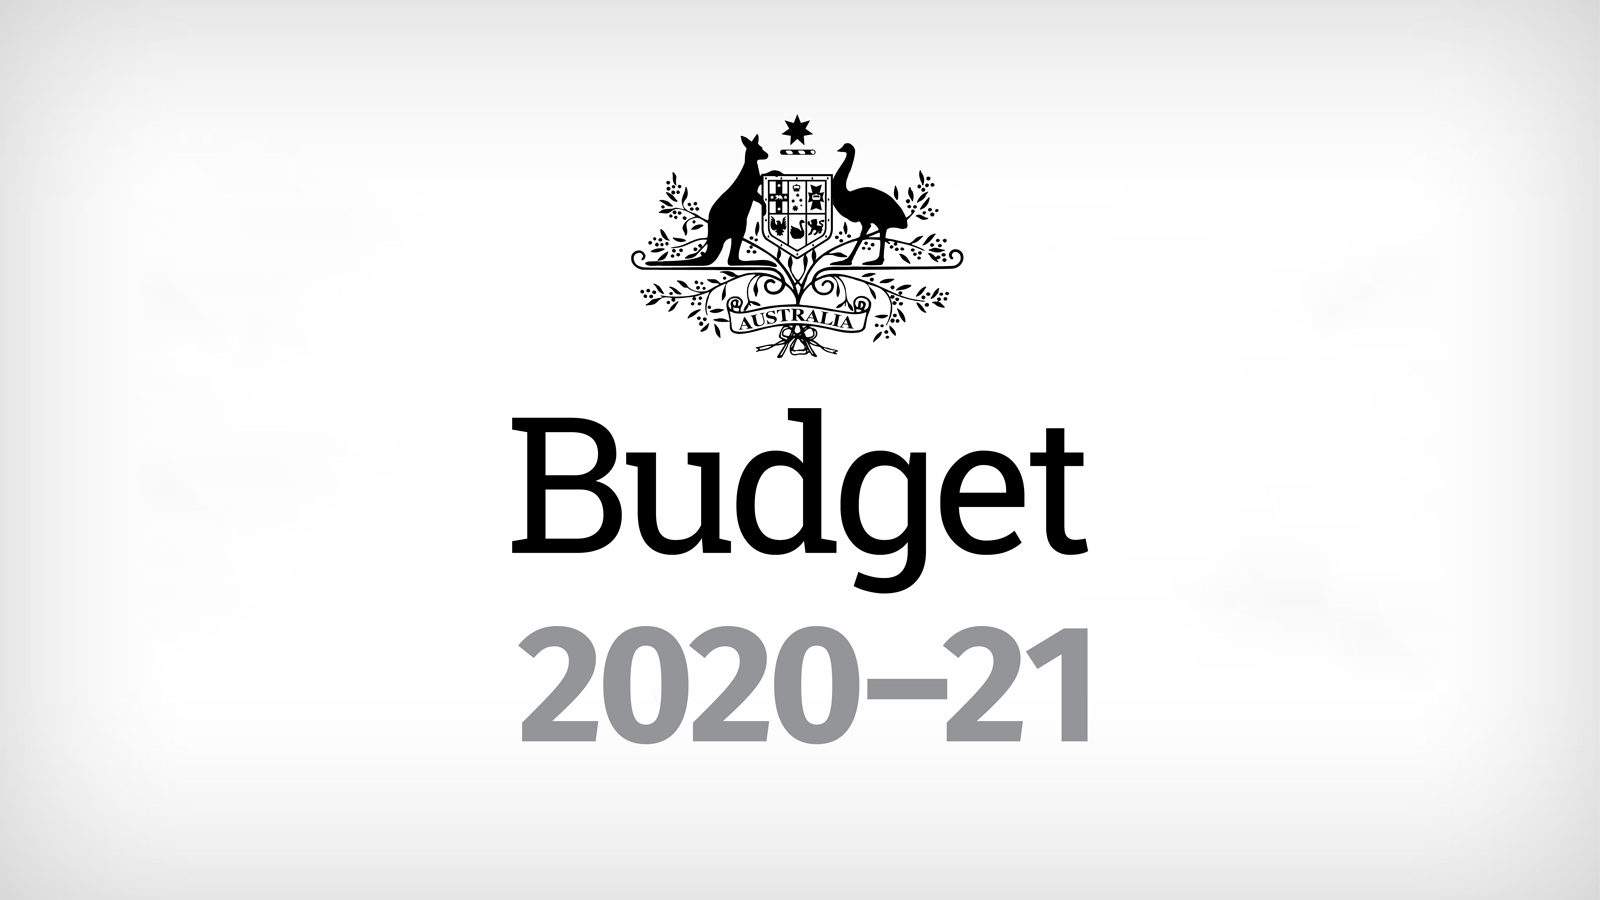 ‘A great win for businesses’: Australian seafood industry welcomes 2020-21 Federal Budget